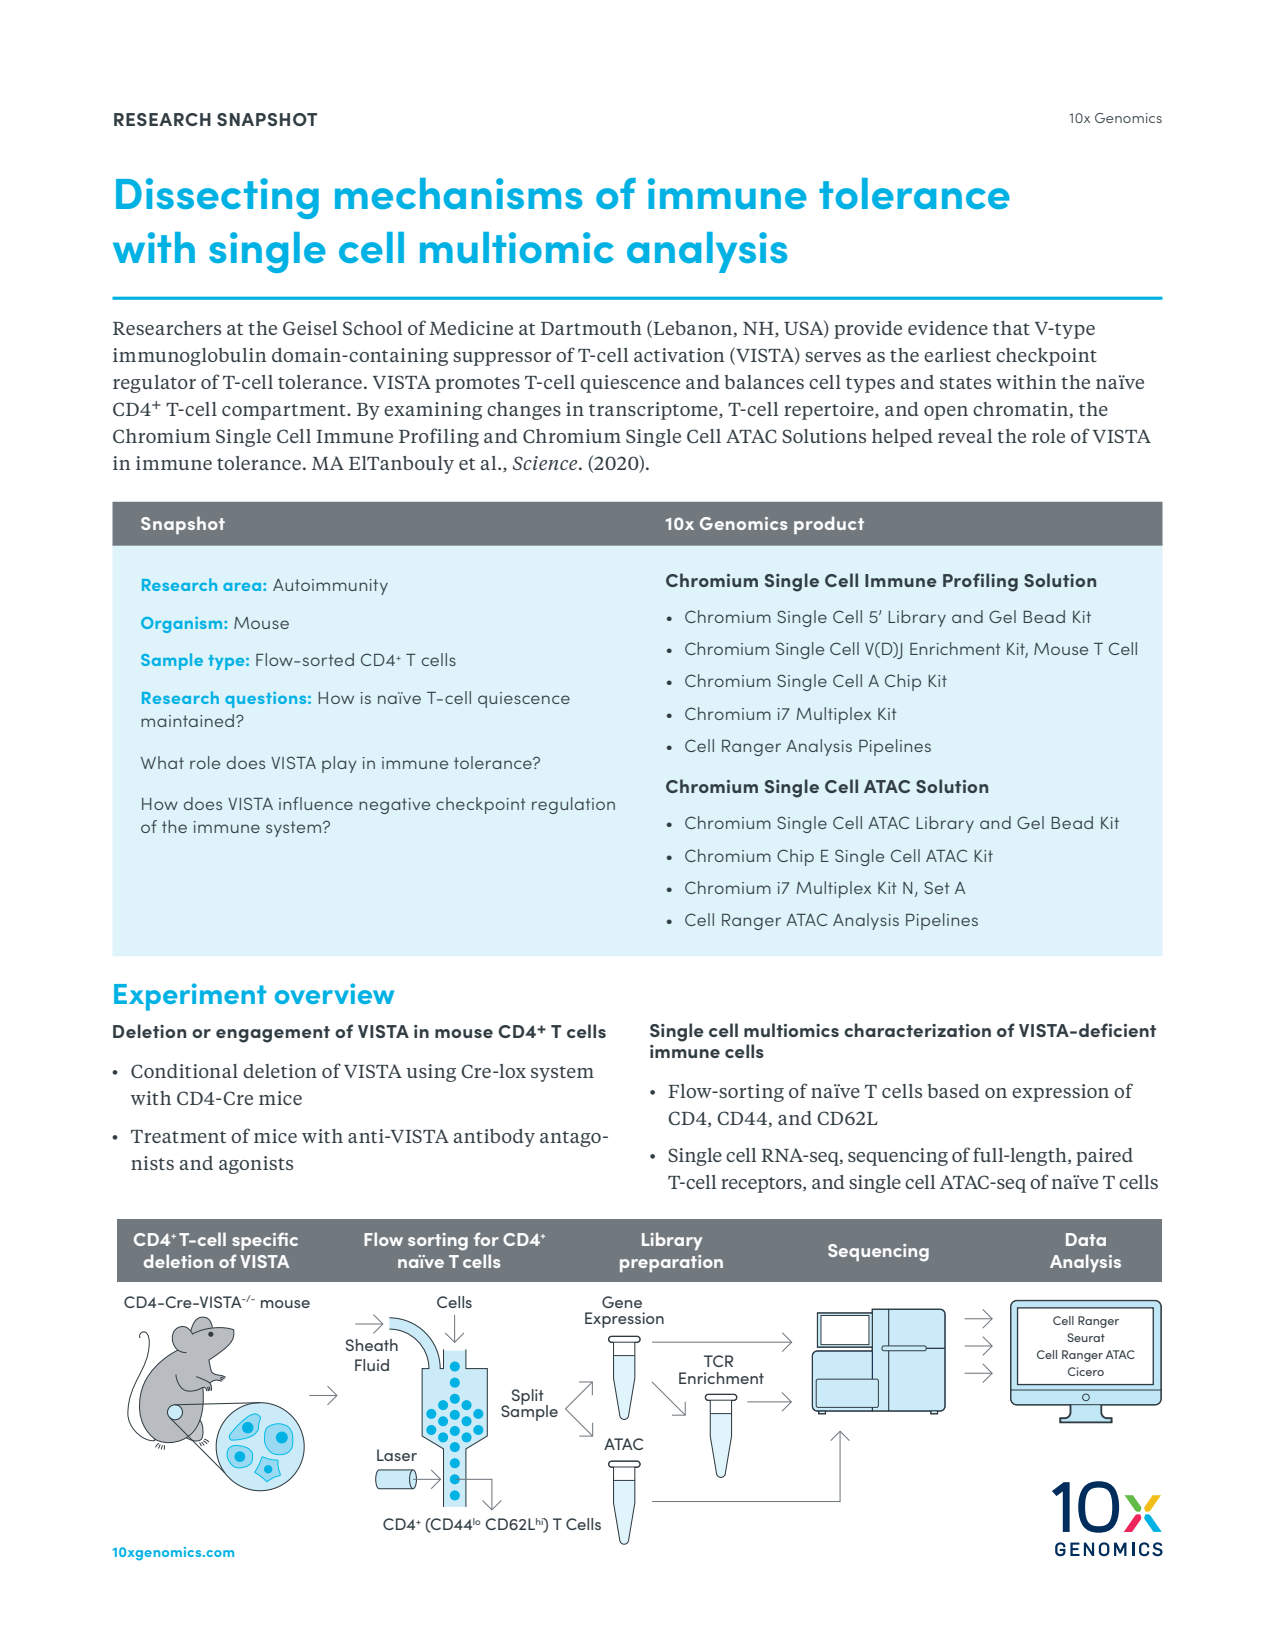 Dissecting mechanisms of immune tolerance with single cell multiomic analysis